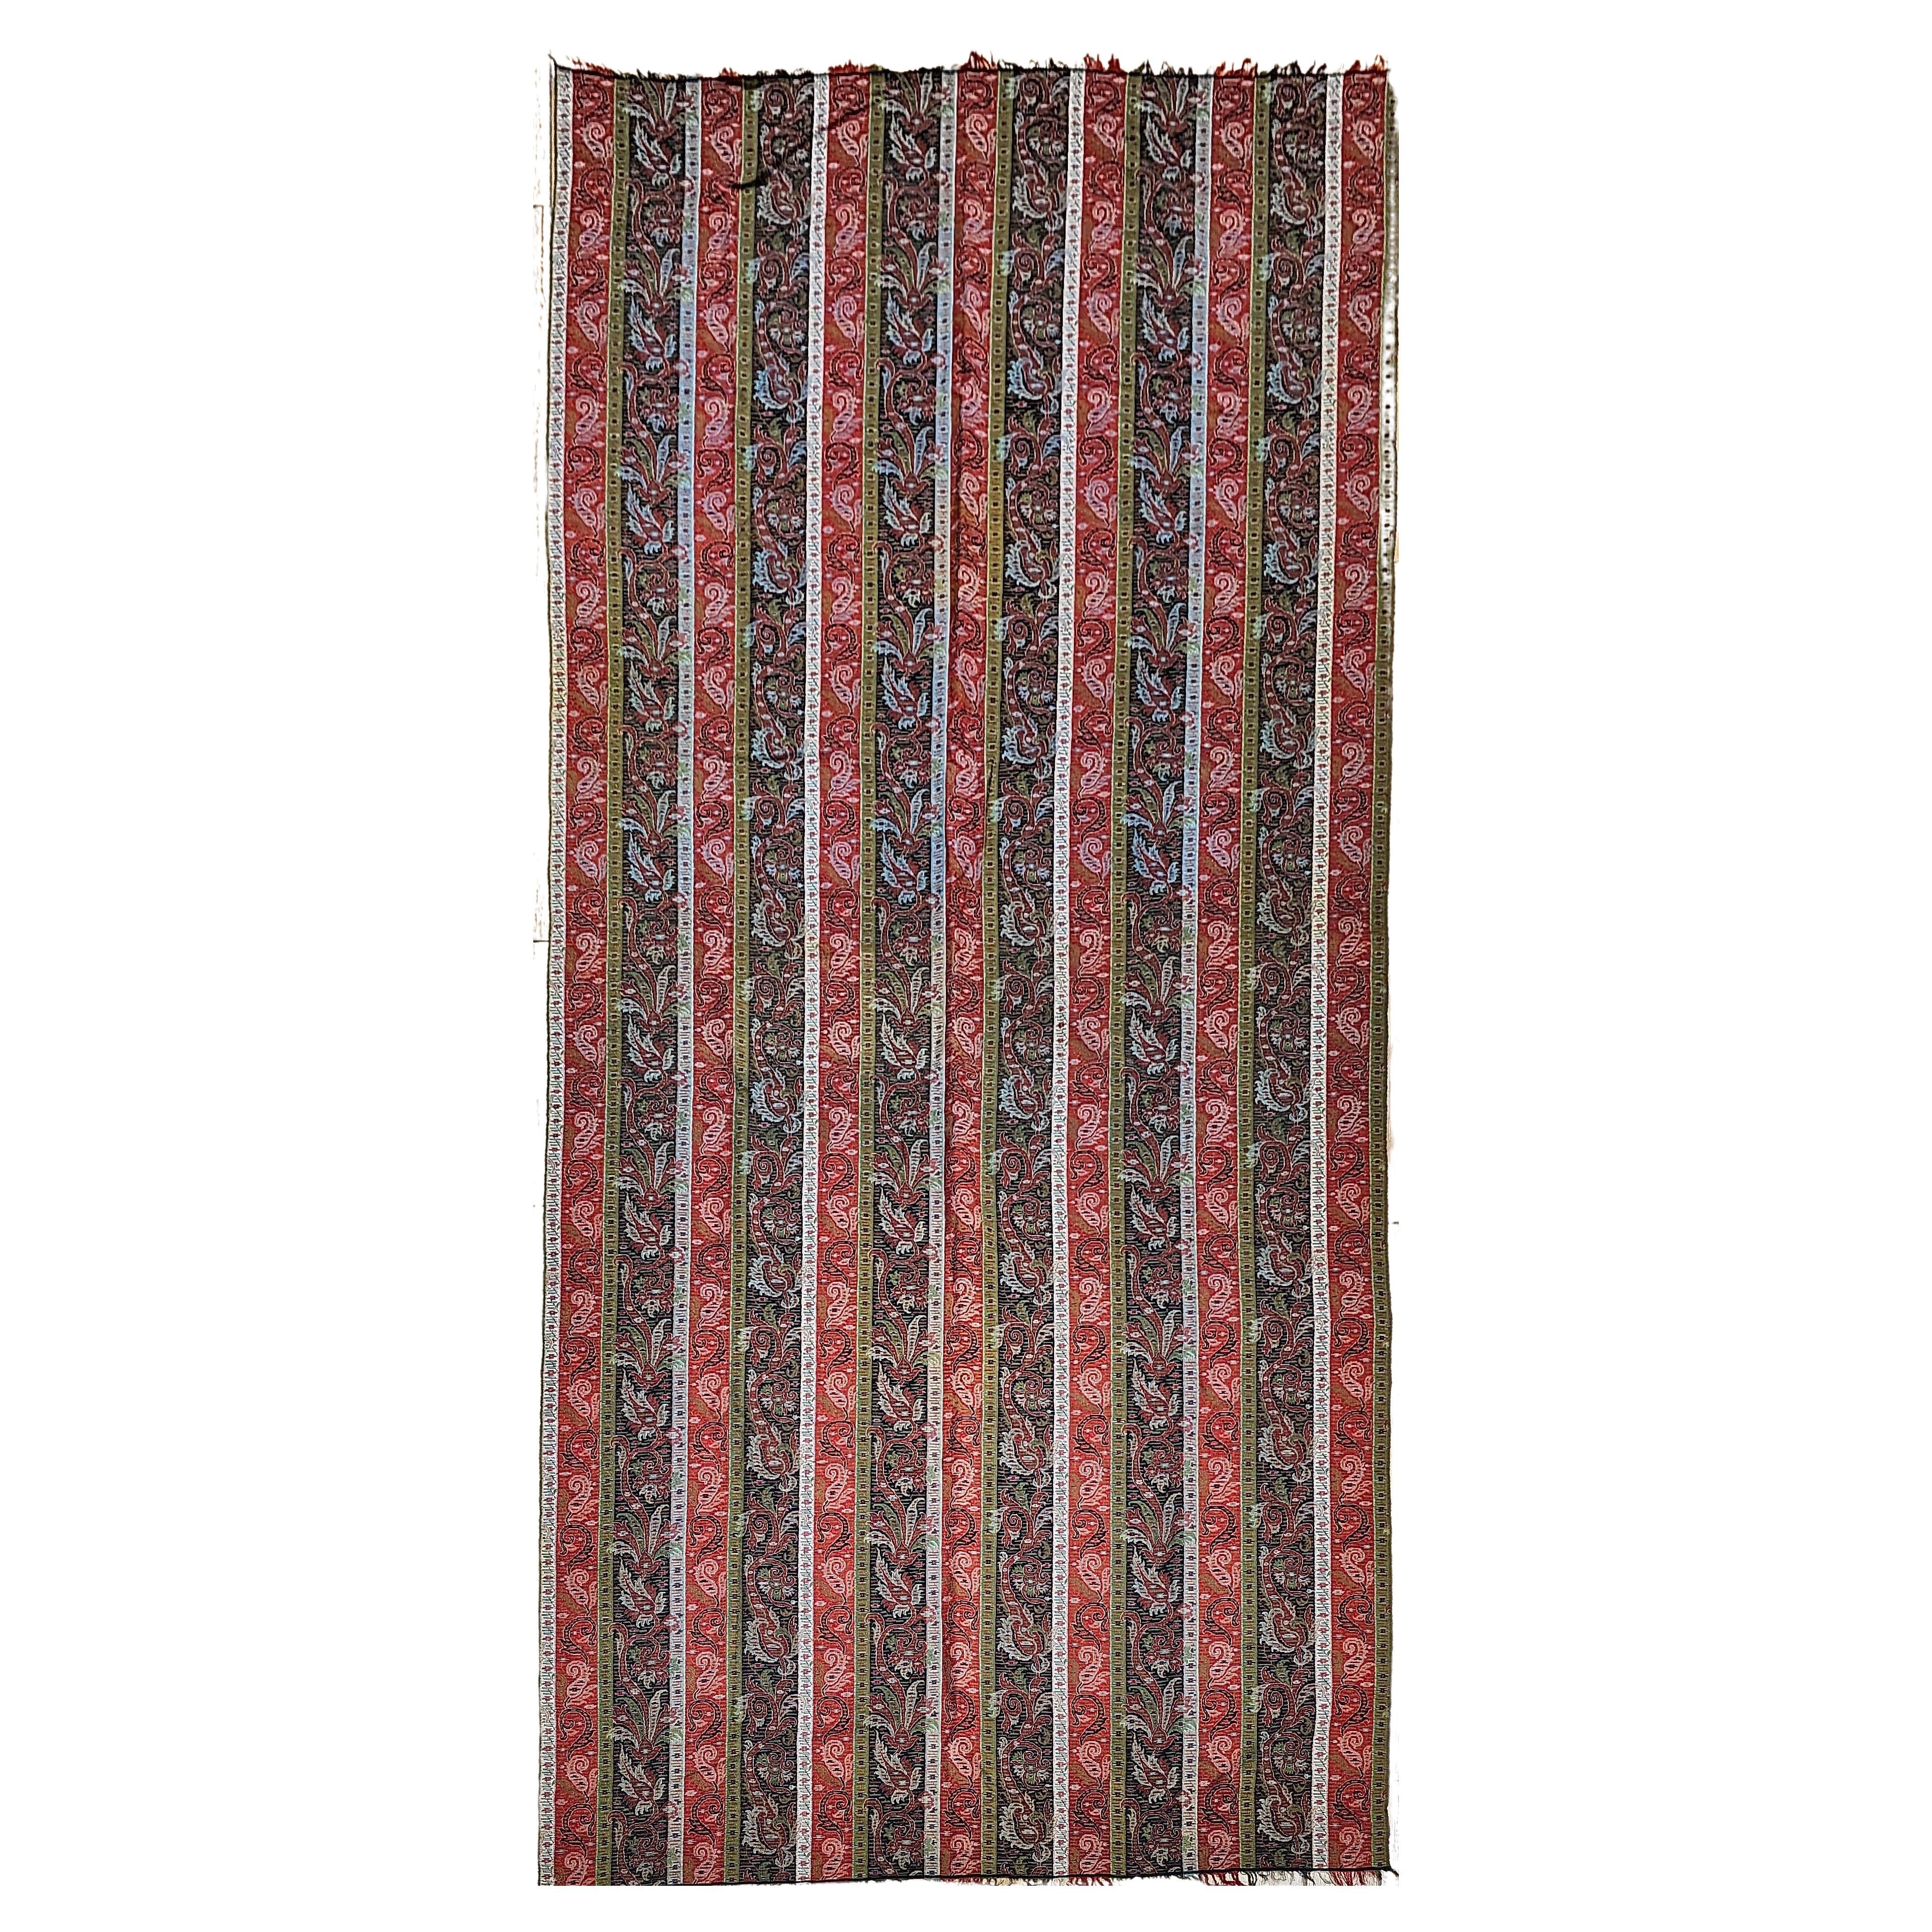 19th Century Hand-Woven Kashmiri Paisley Shawl in Brick Red, Ivory, Black, Green For Sale